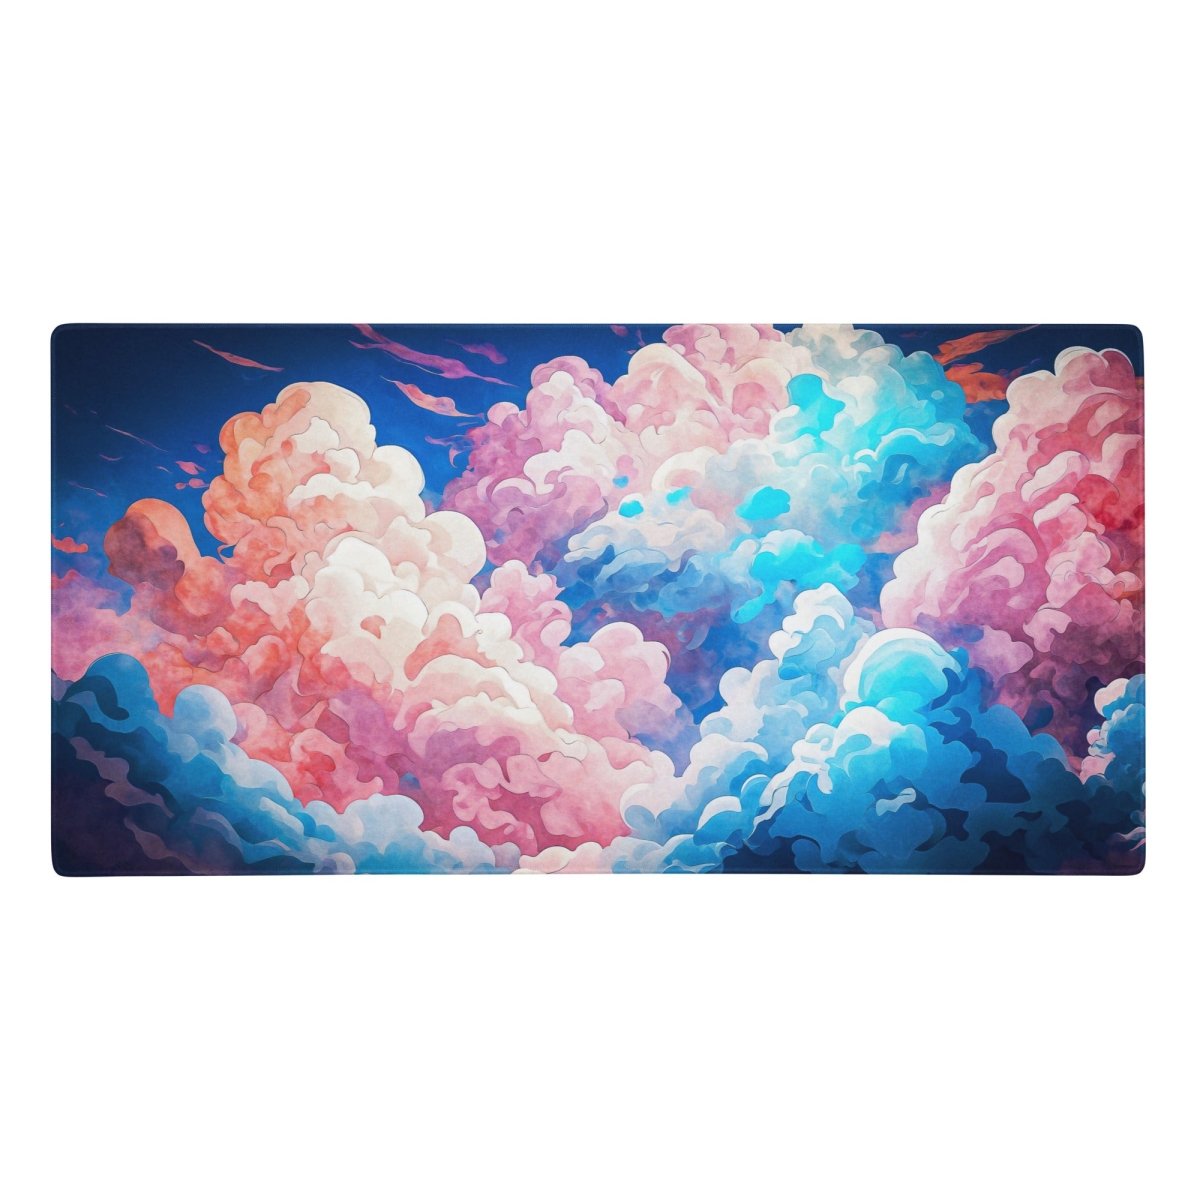 Bright clouds escape - Gaming mouse pad - Ever colorful